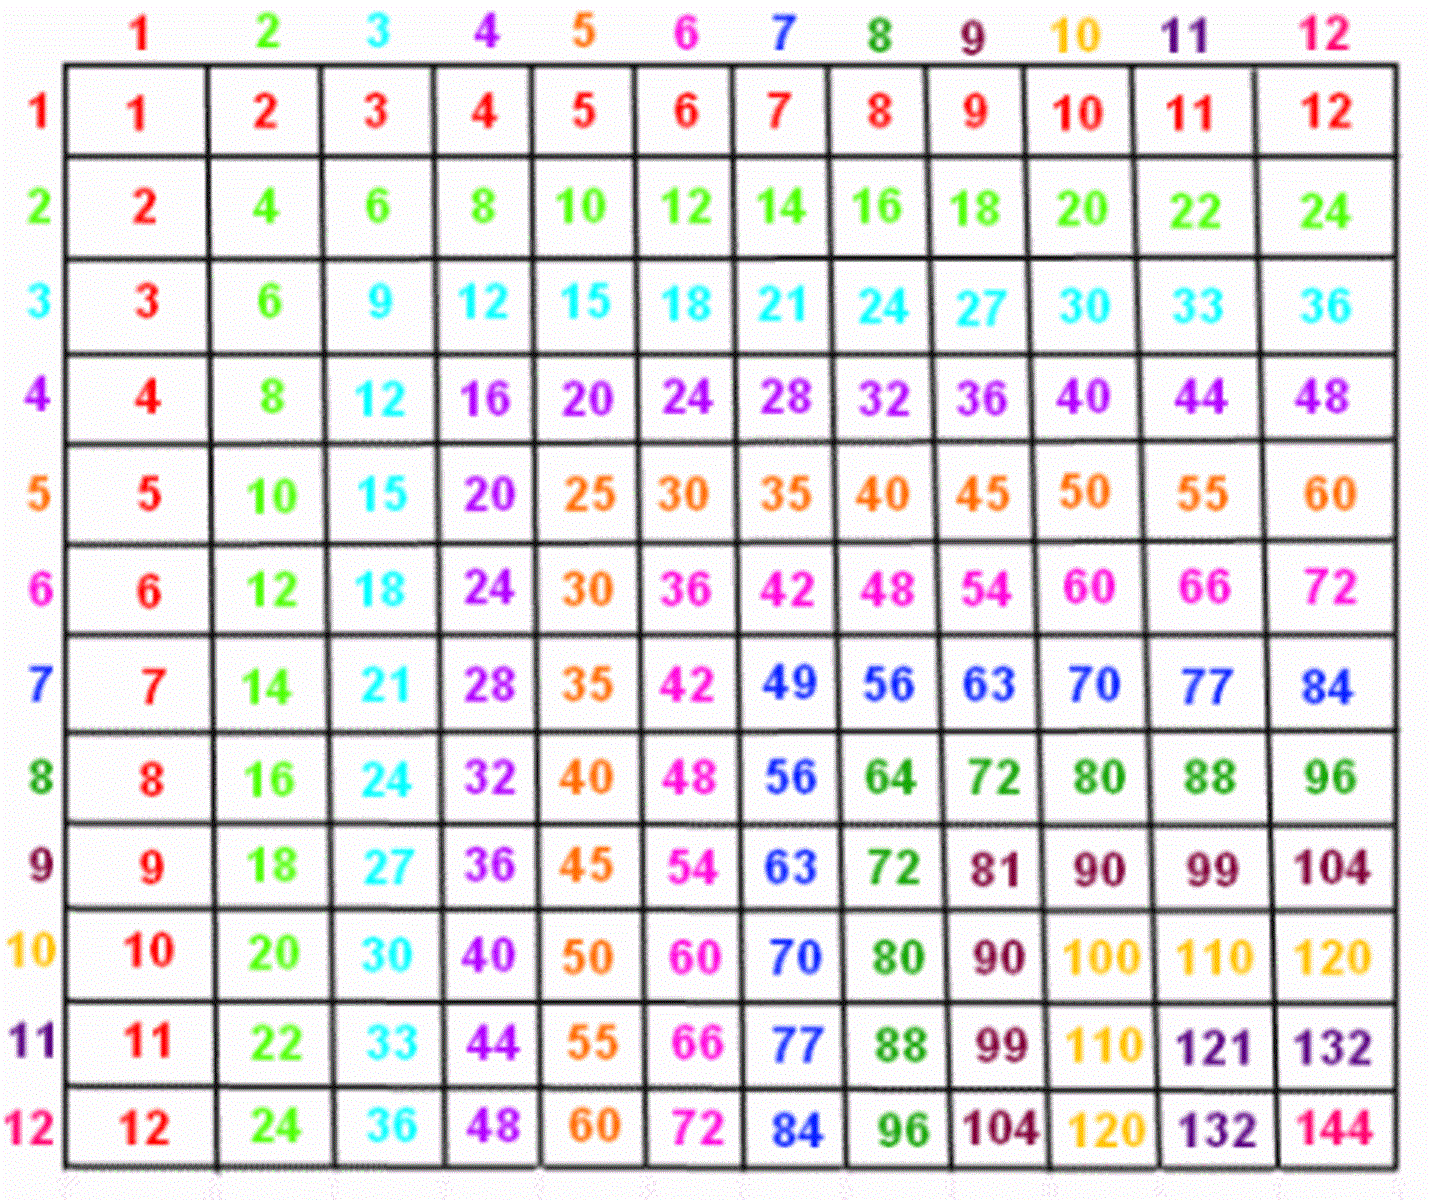 12 times table worksheet for kids